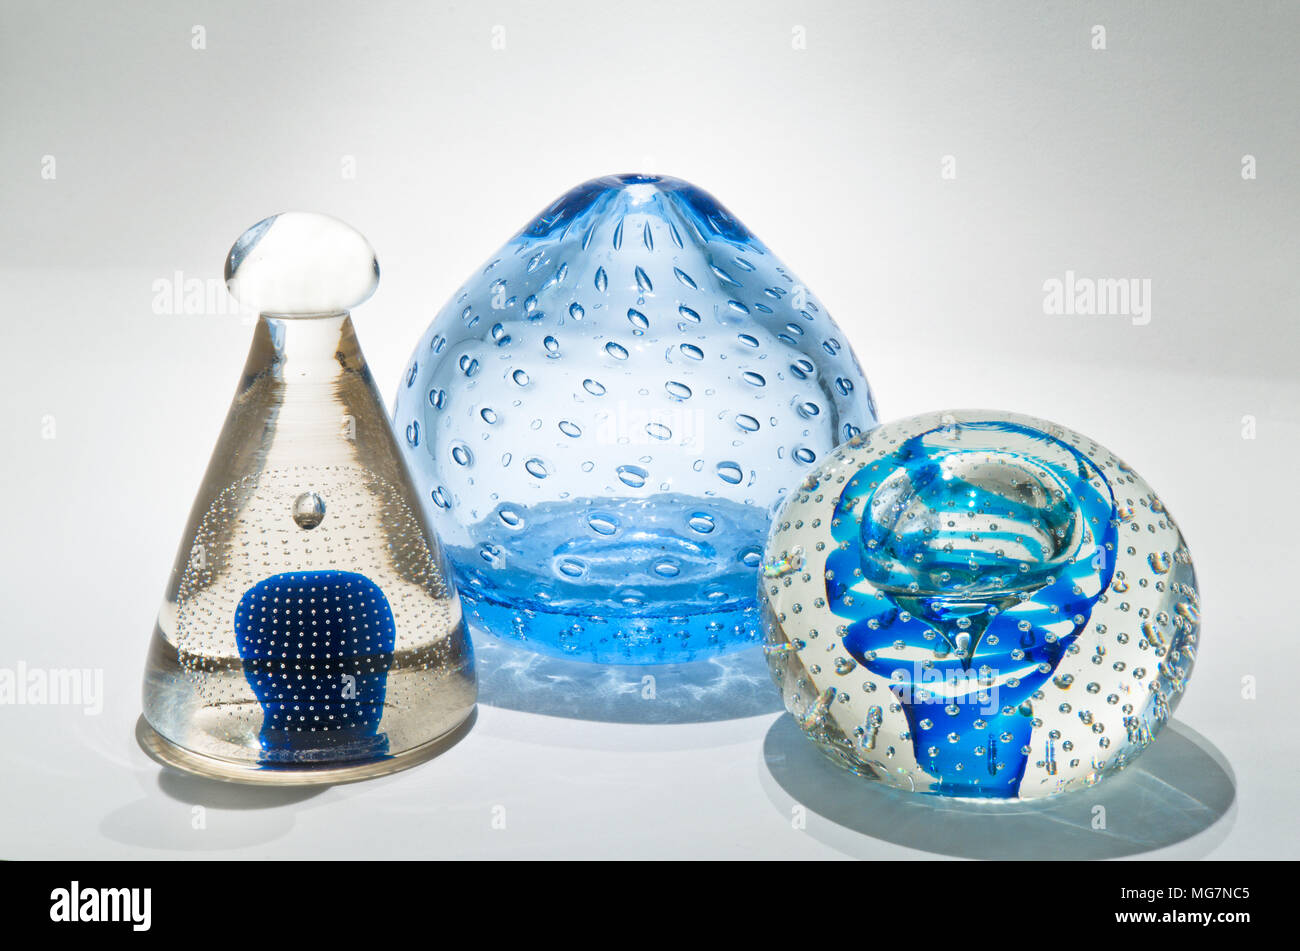 Whitefriars Blue Bubbled Glass Doorstops Stock Photo